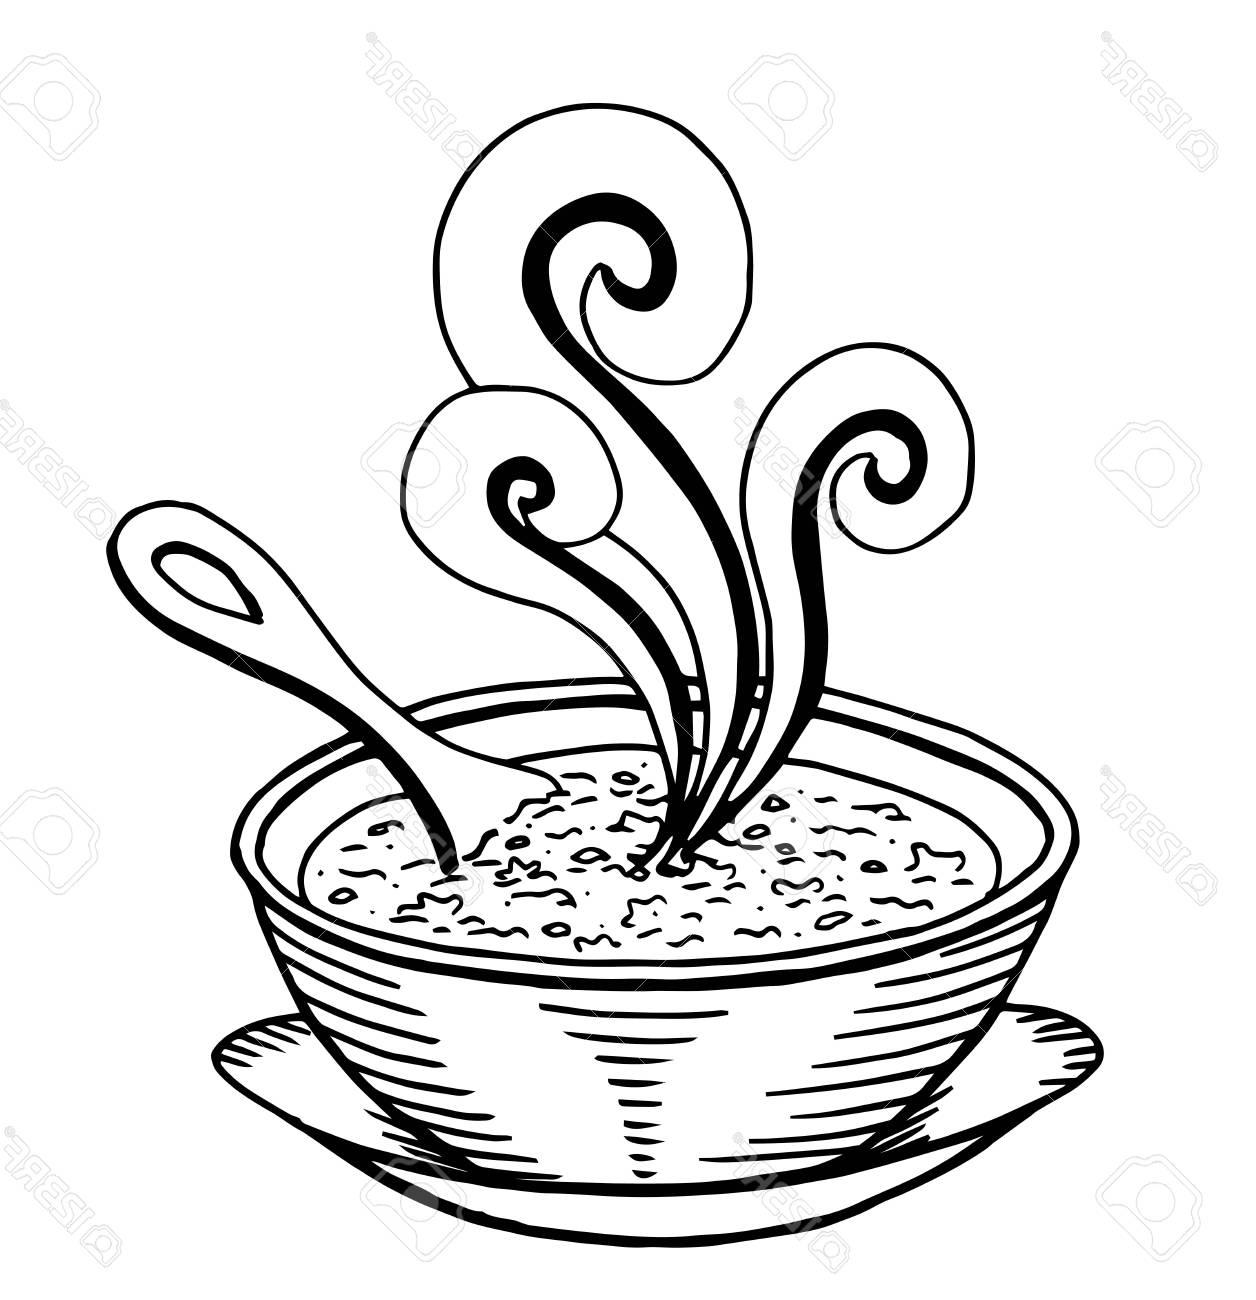 Soup drawing vector.